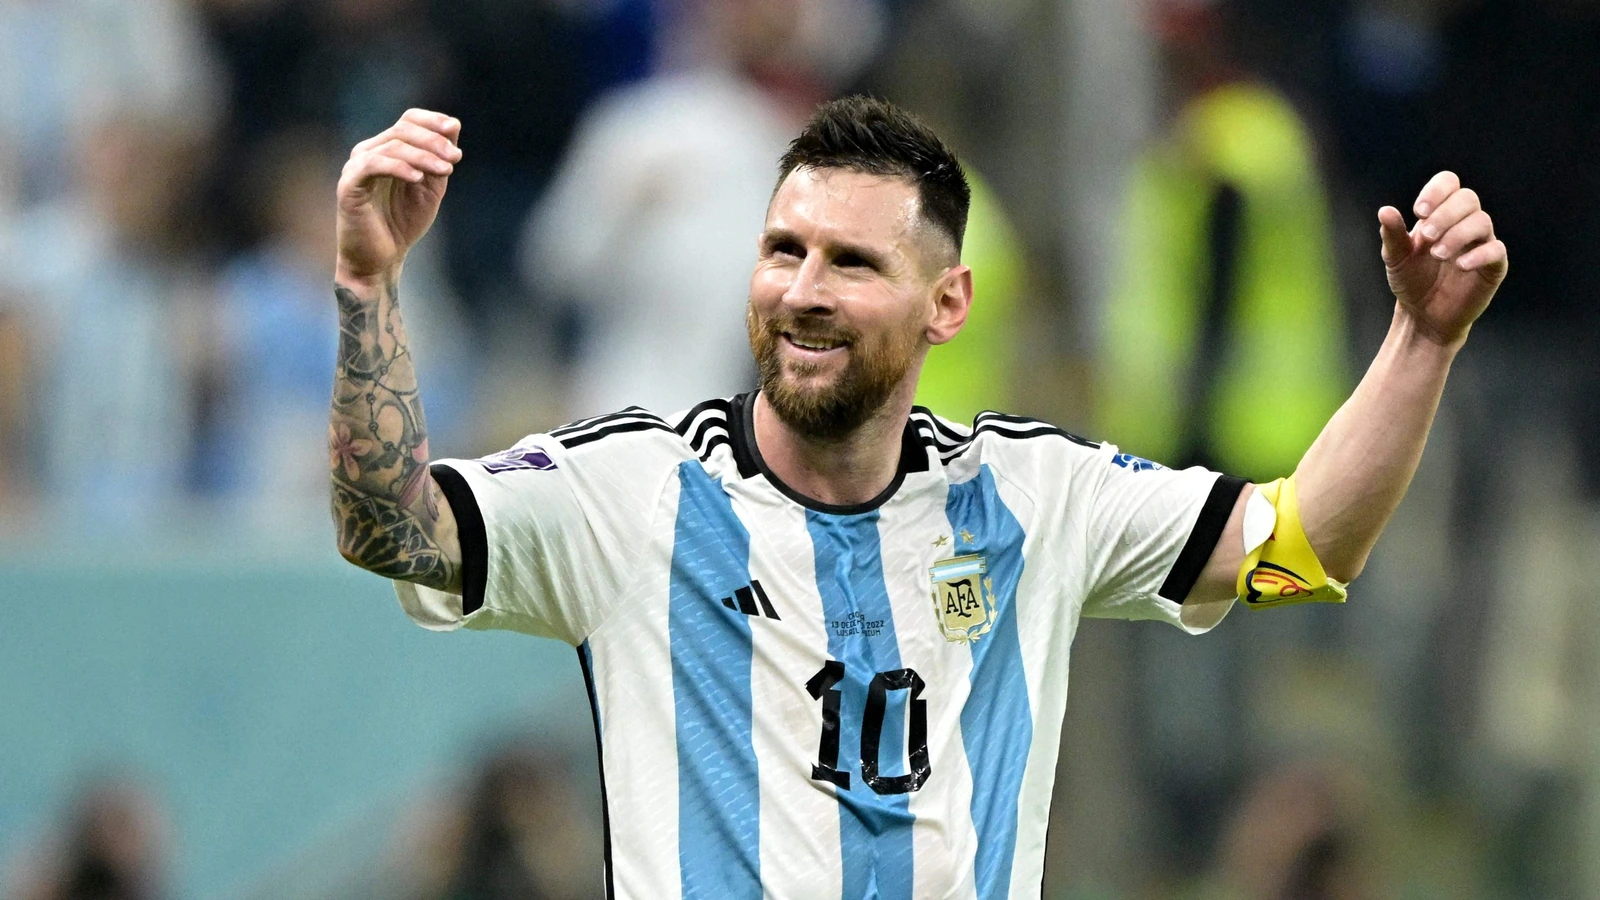 Lionel Messi Led Argentina to the 2022 World Cup Glory in Qatar